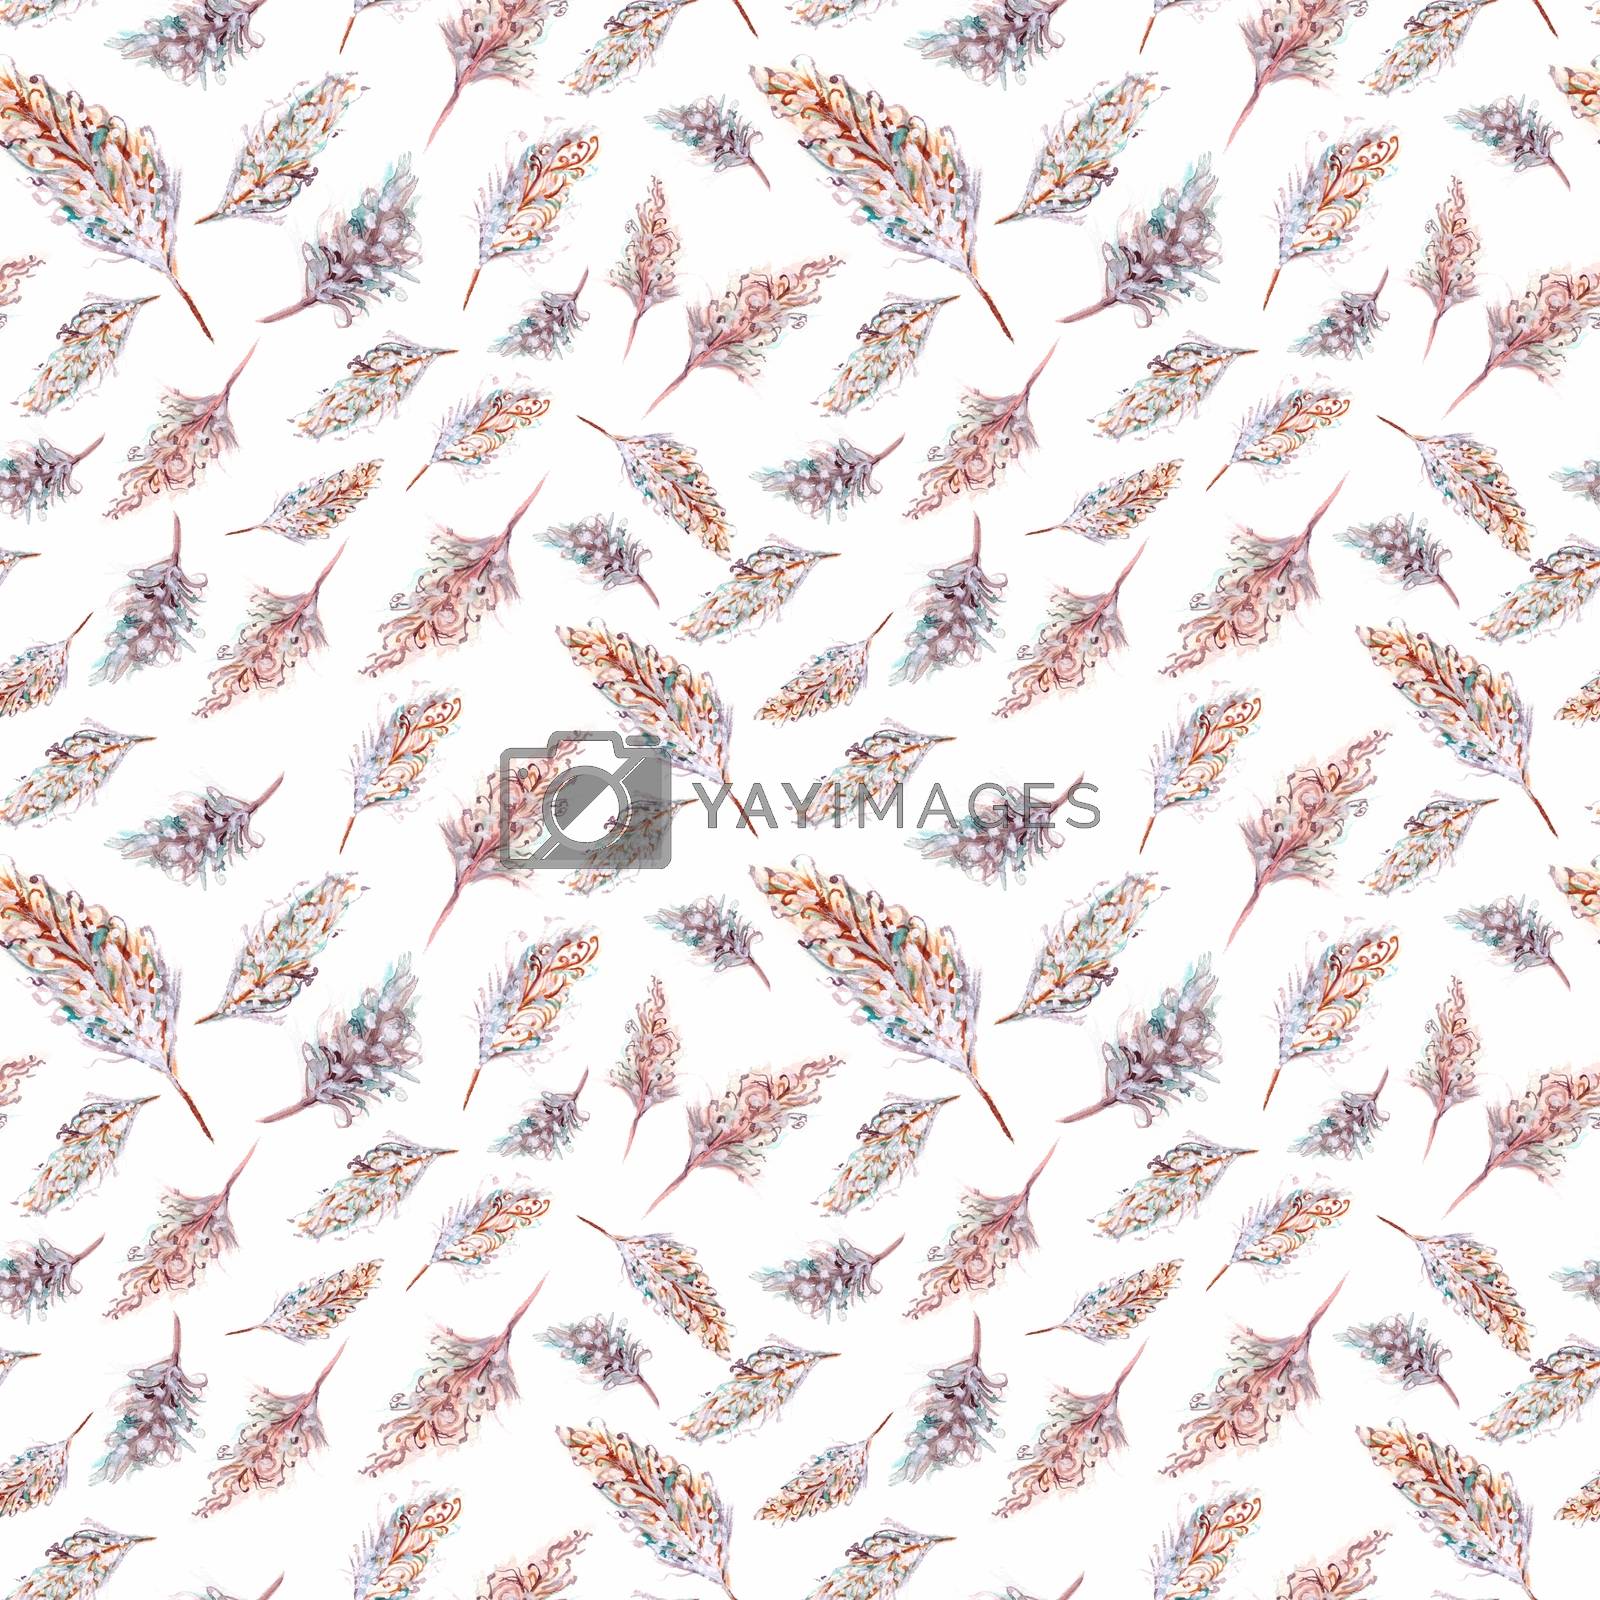 Royalty free image of Light Feather pattern by kisika